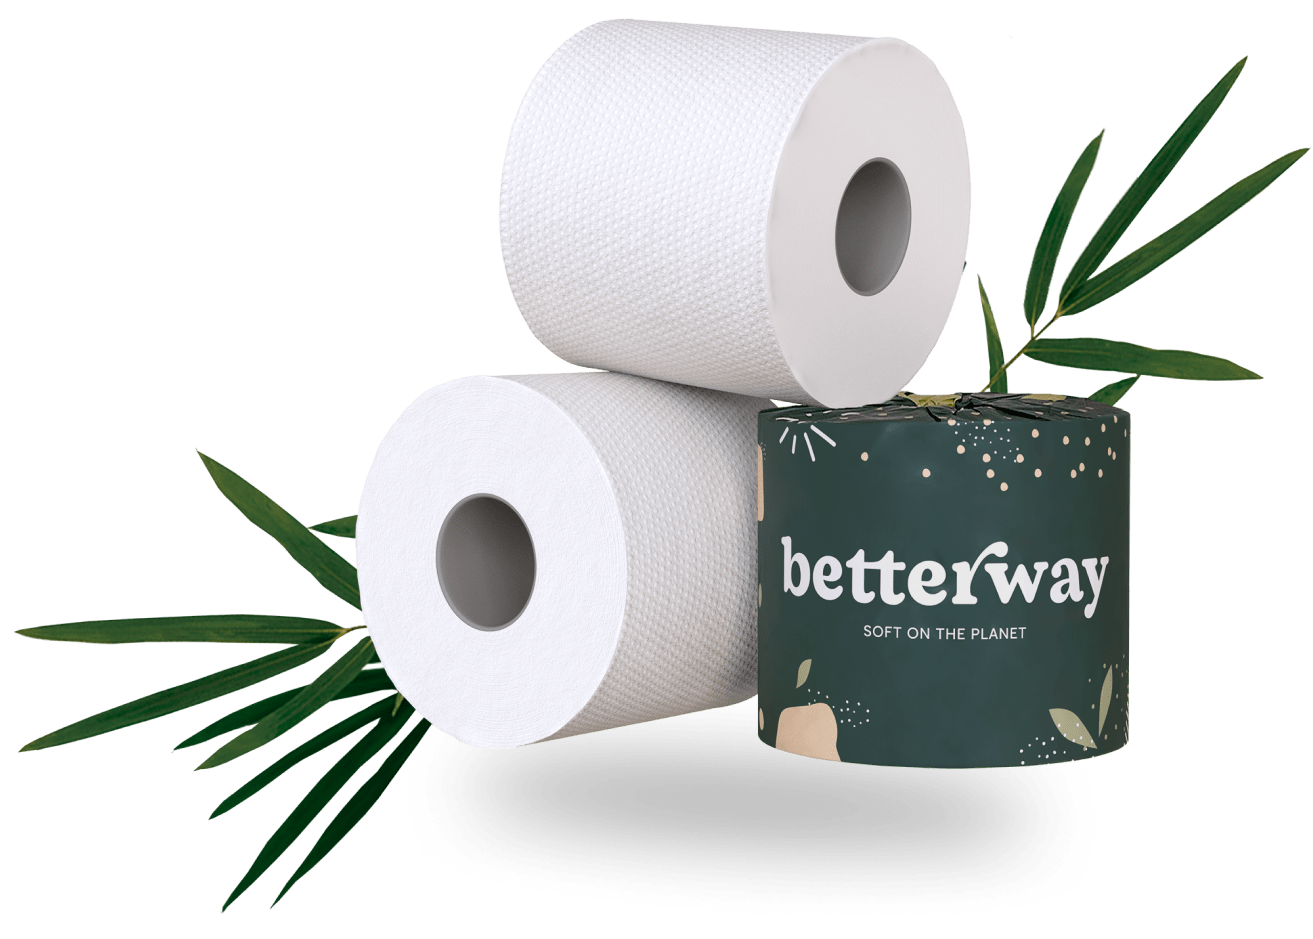 100% Bamboo Toilet Paper. Soft on the planet, and soft on you. – Betterway